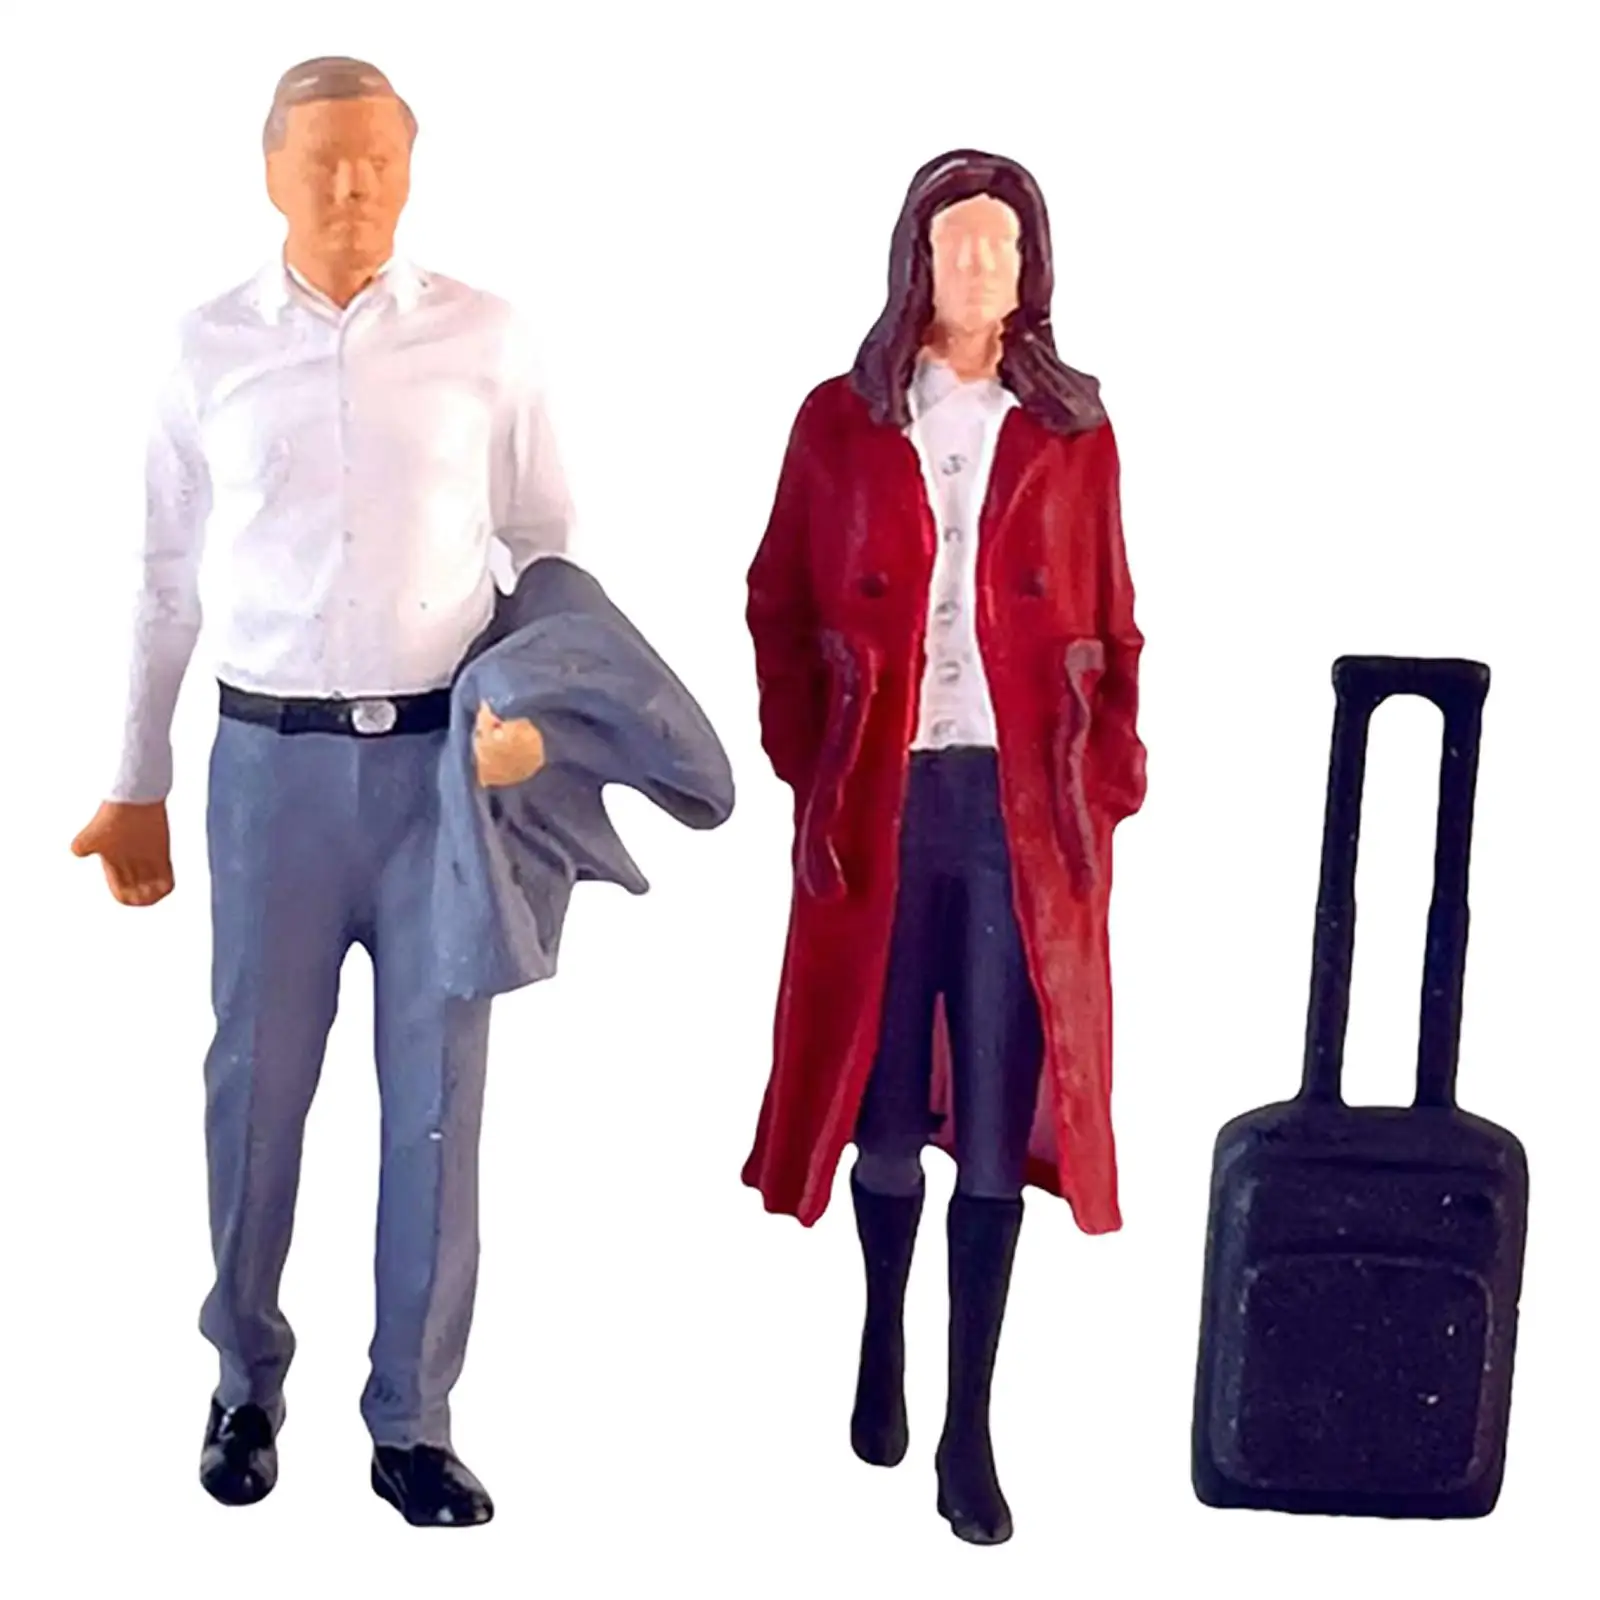 2Pcs 1/64 Women and Men Figures with Suitcase Model Sand Table Layout Decoration Collections S Gauge Resin Figurines Decor